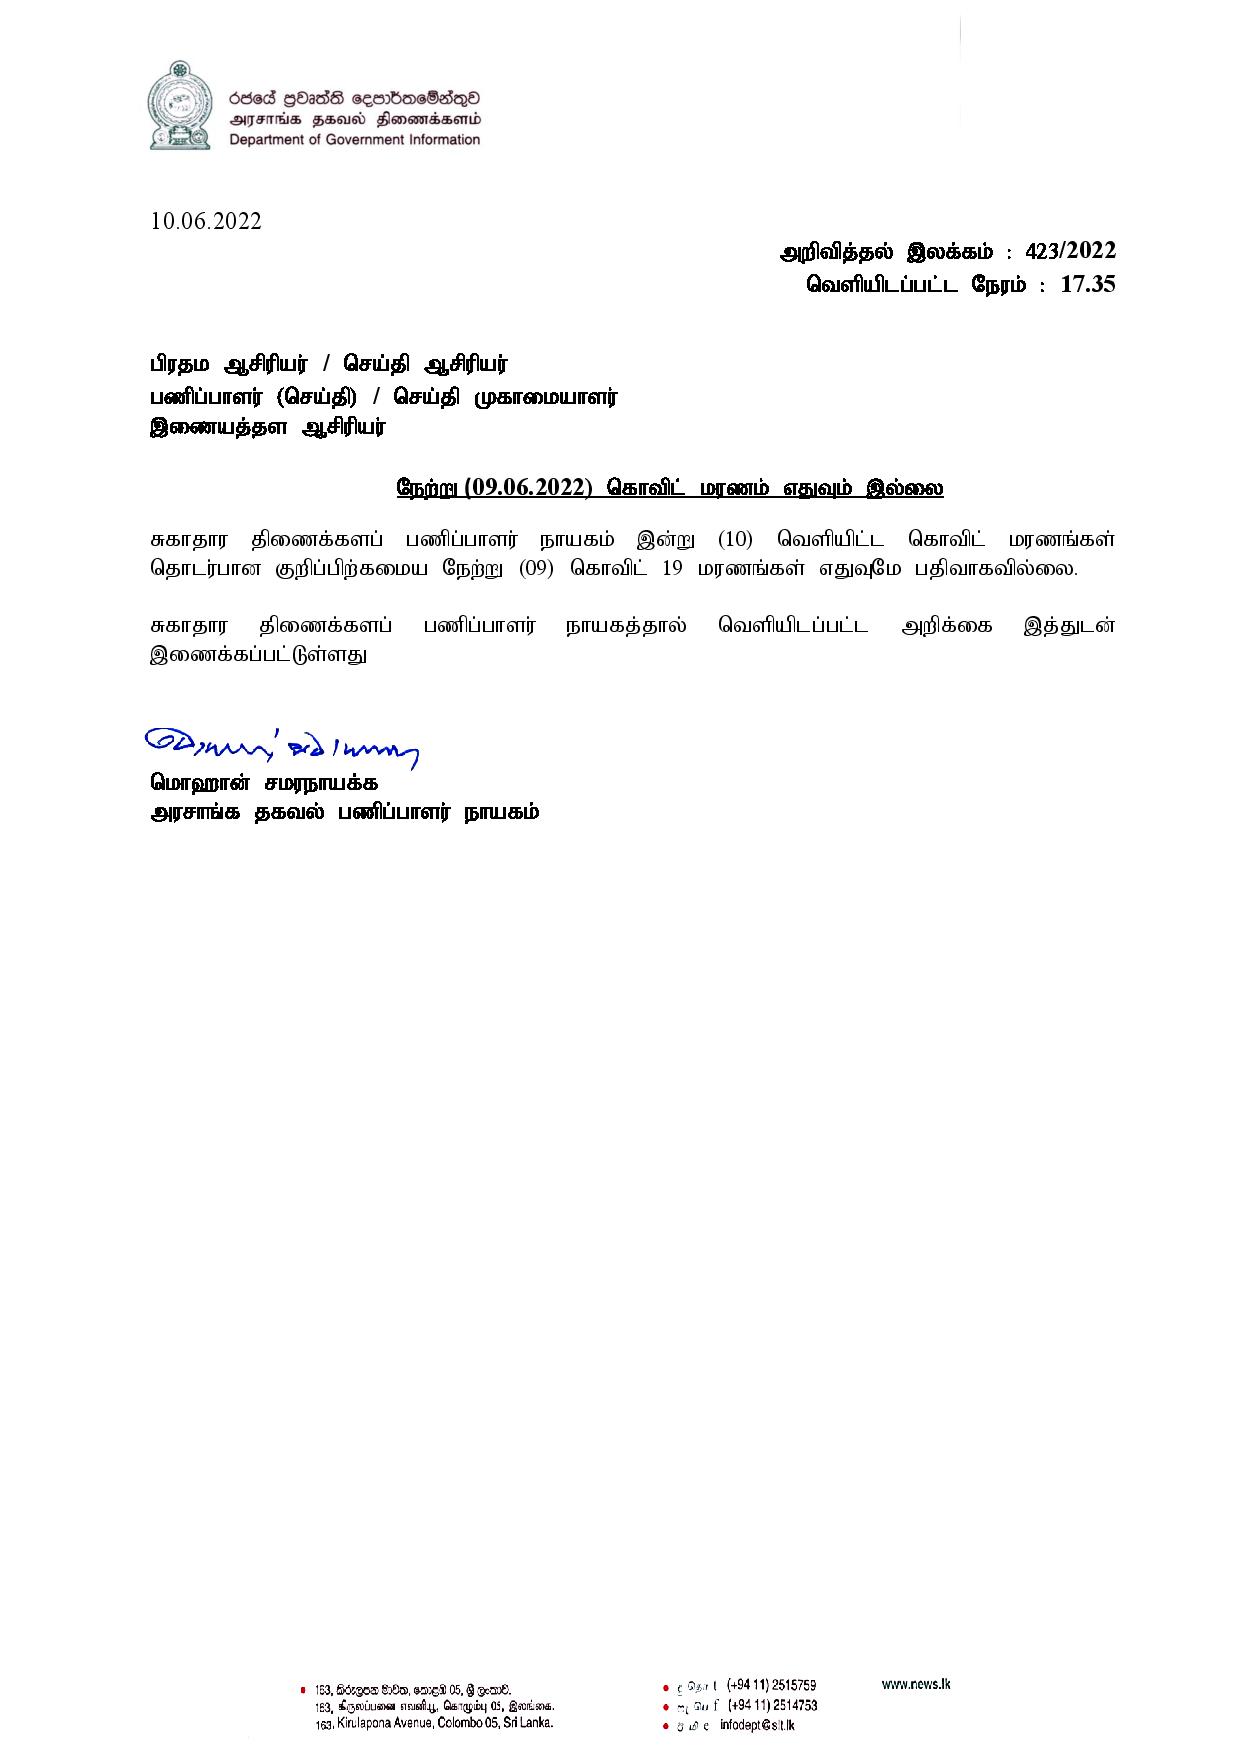 Release No 423 Tamil page 001